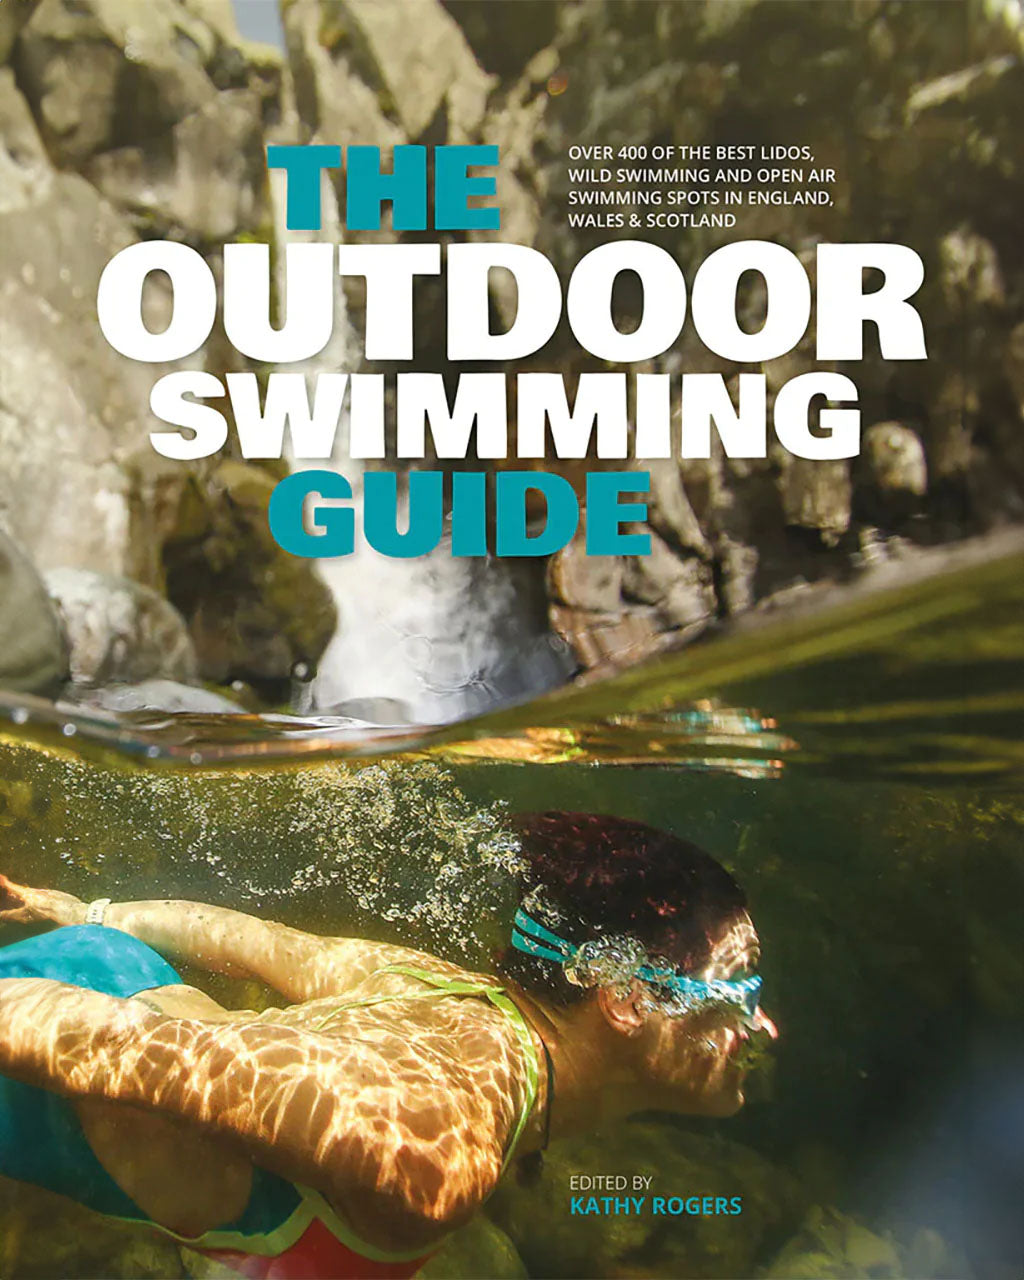 The Outdoor Swimming Guide by Kathy Rogers